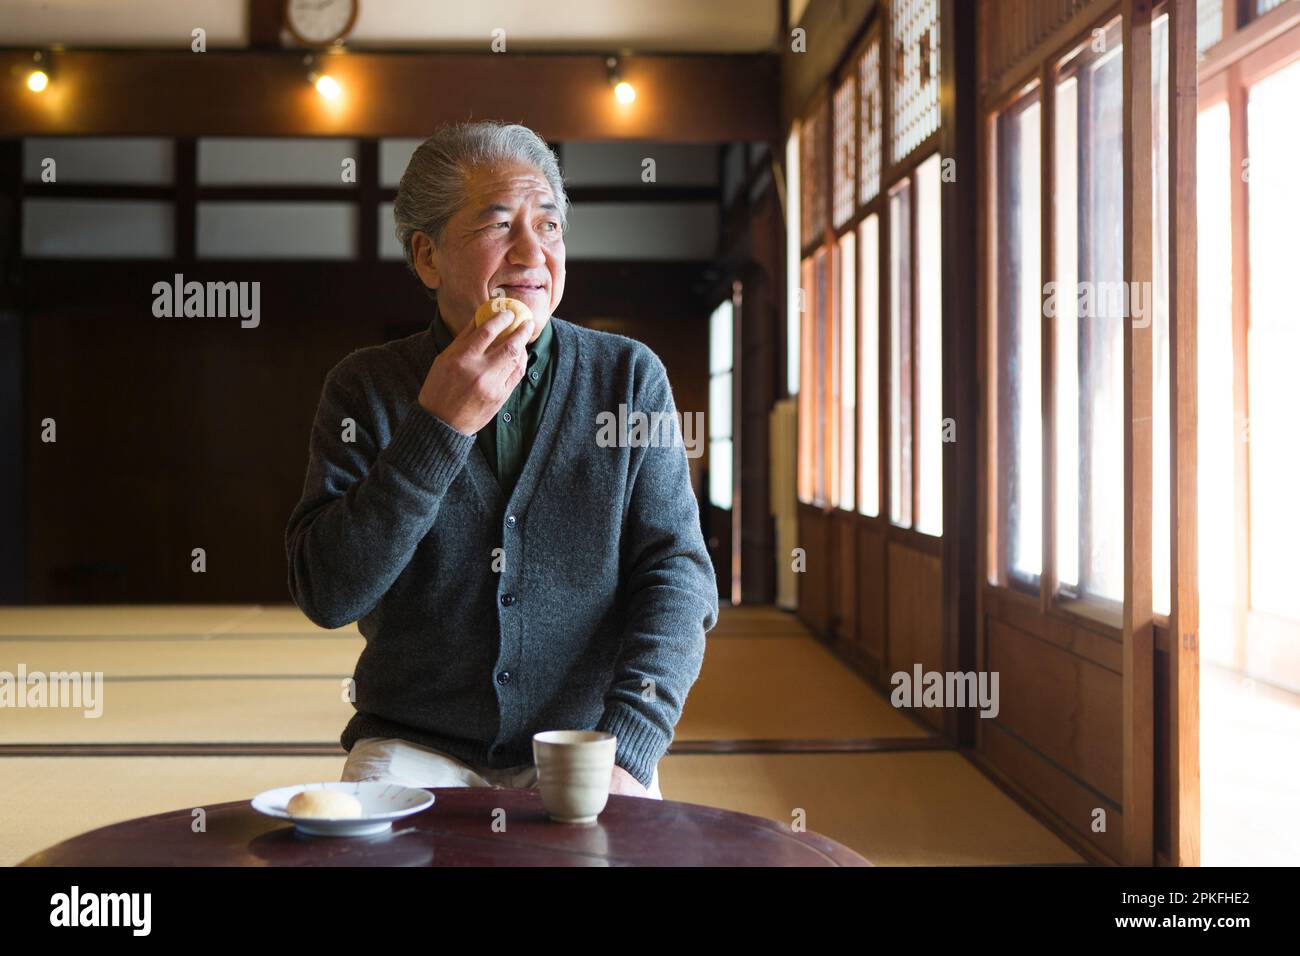 Senior man drinking tea at an old private house Stock Photo